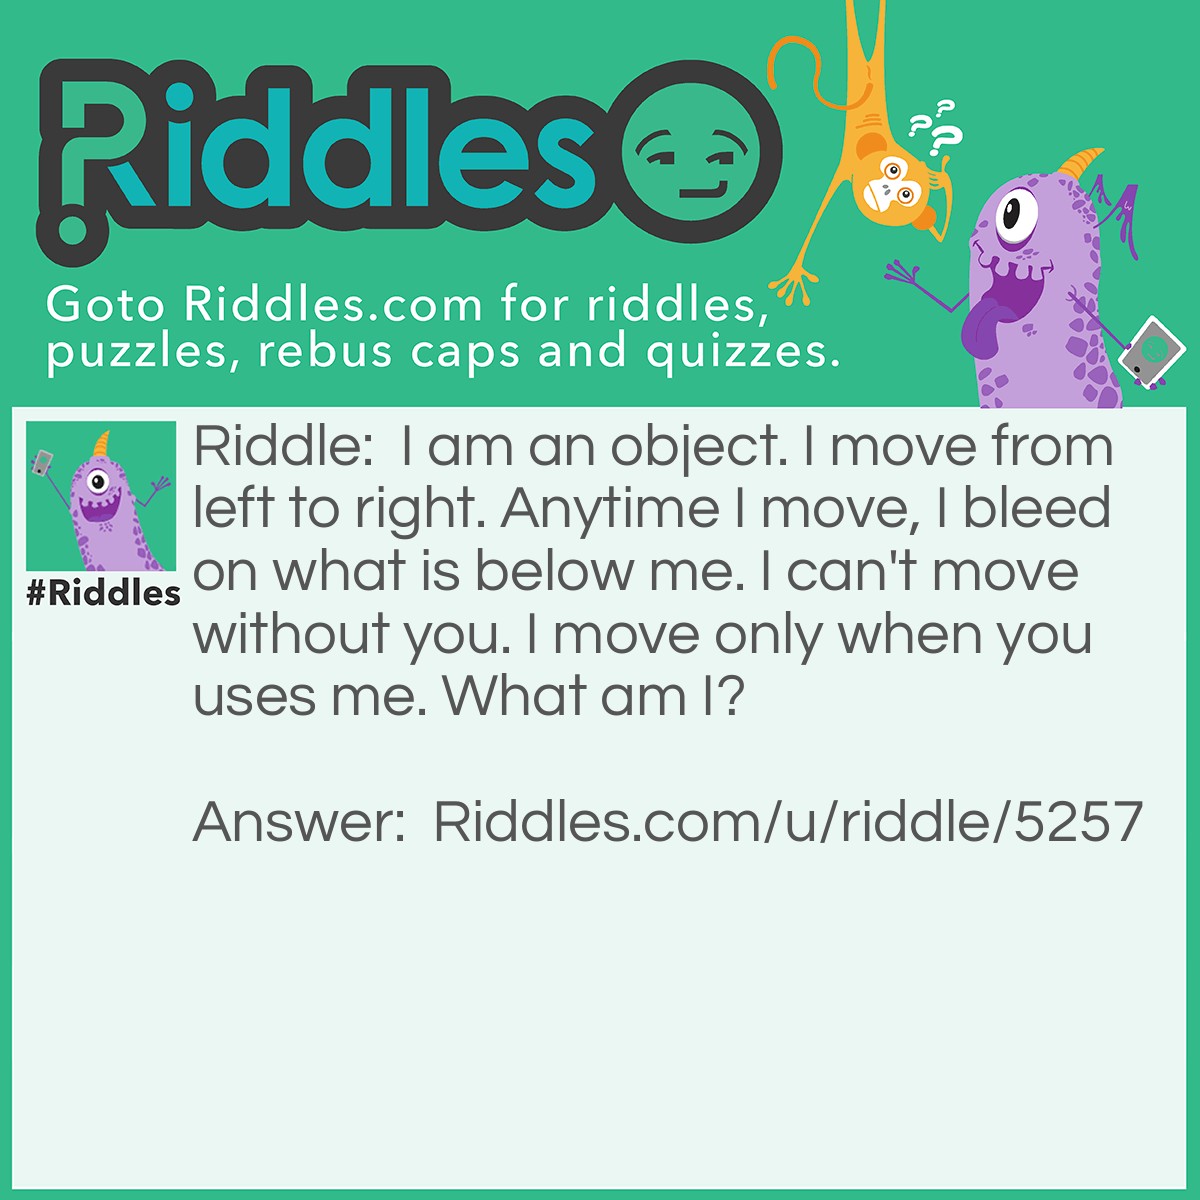 Riddle: I am an object. I move from left to right. Anytime I move, I bleed on what is below me. I can't move without you. I move only when you uses me. What am I? Answer: A pen.